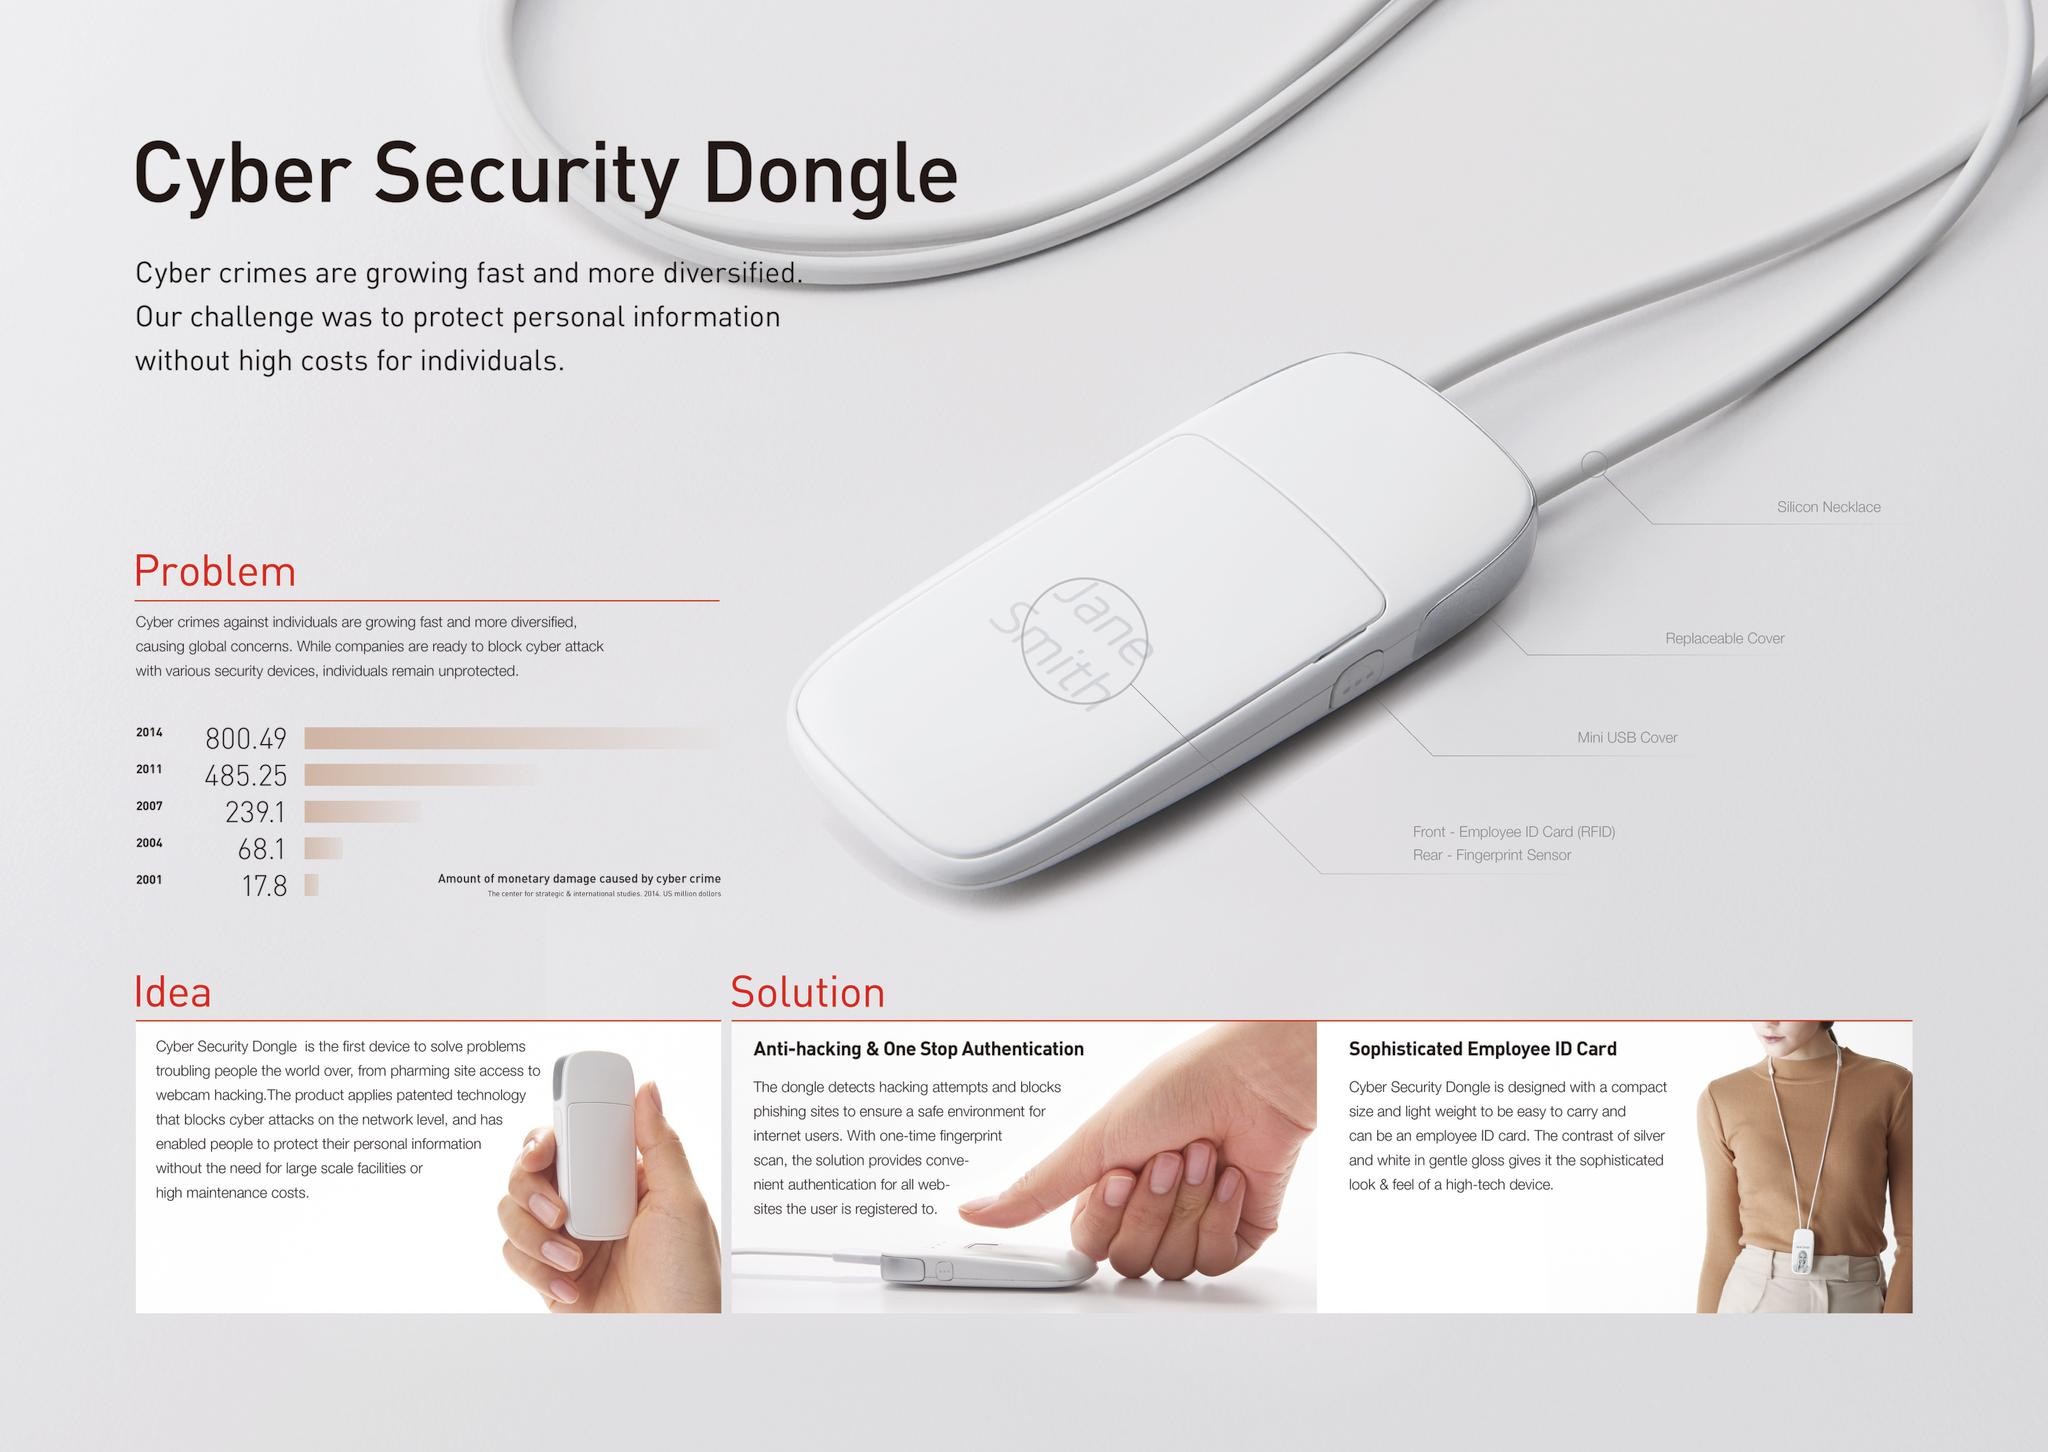 Cyber security dongle